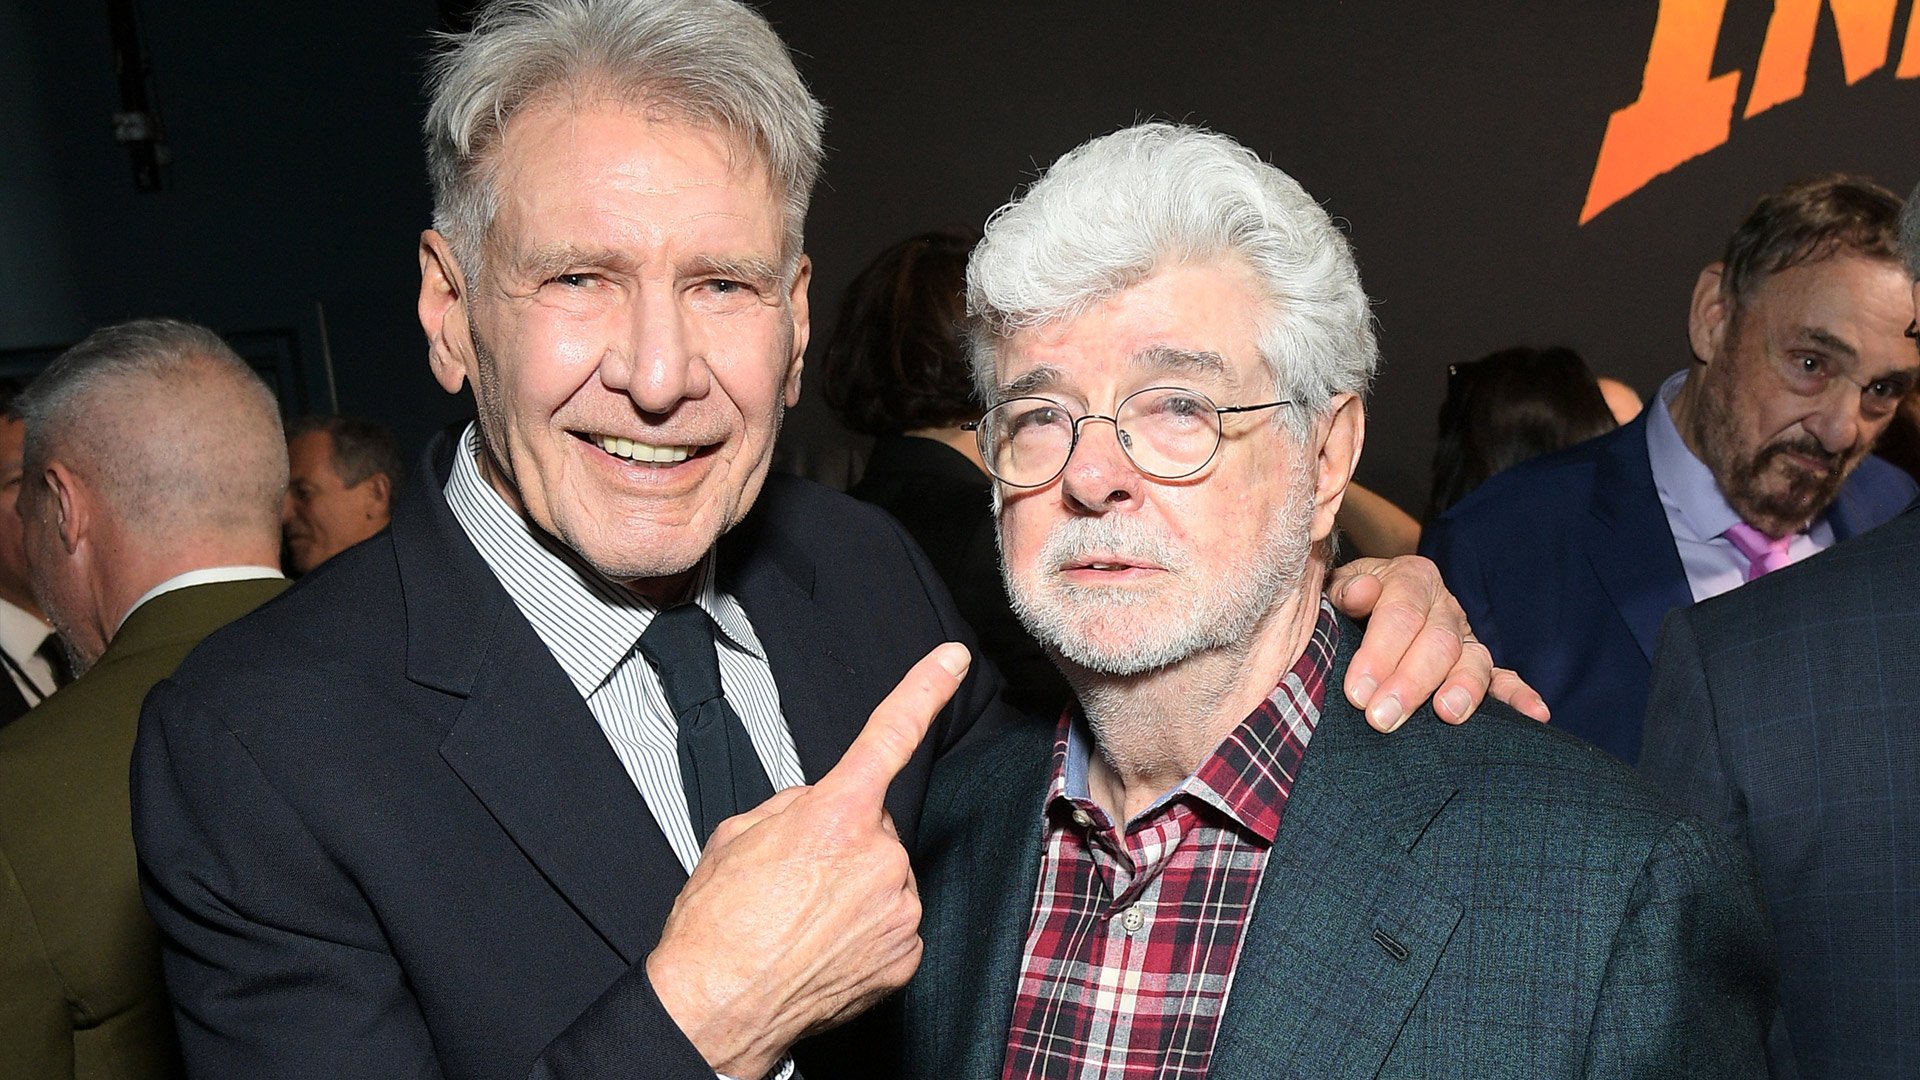 Harrison Ford and George Lucas at the U.S. premiere red carpet